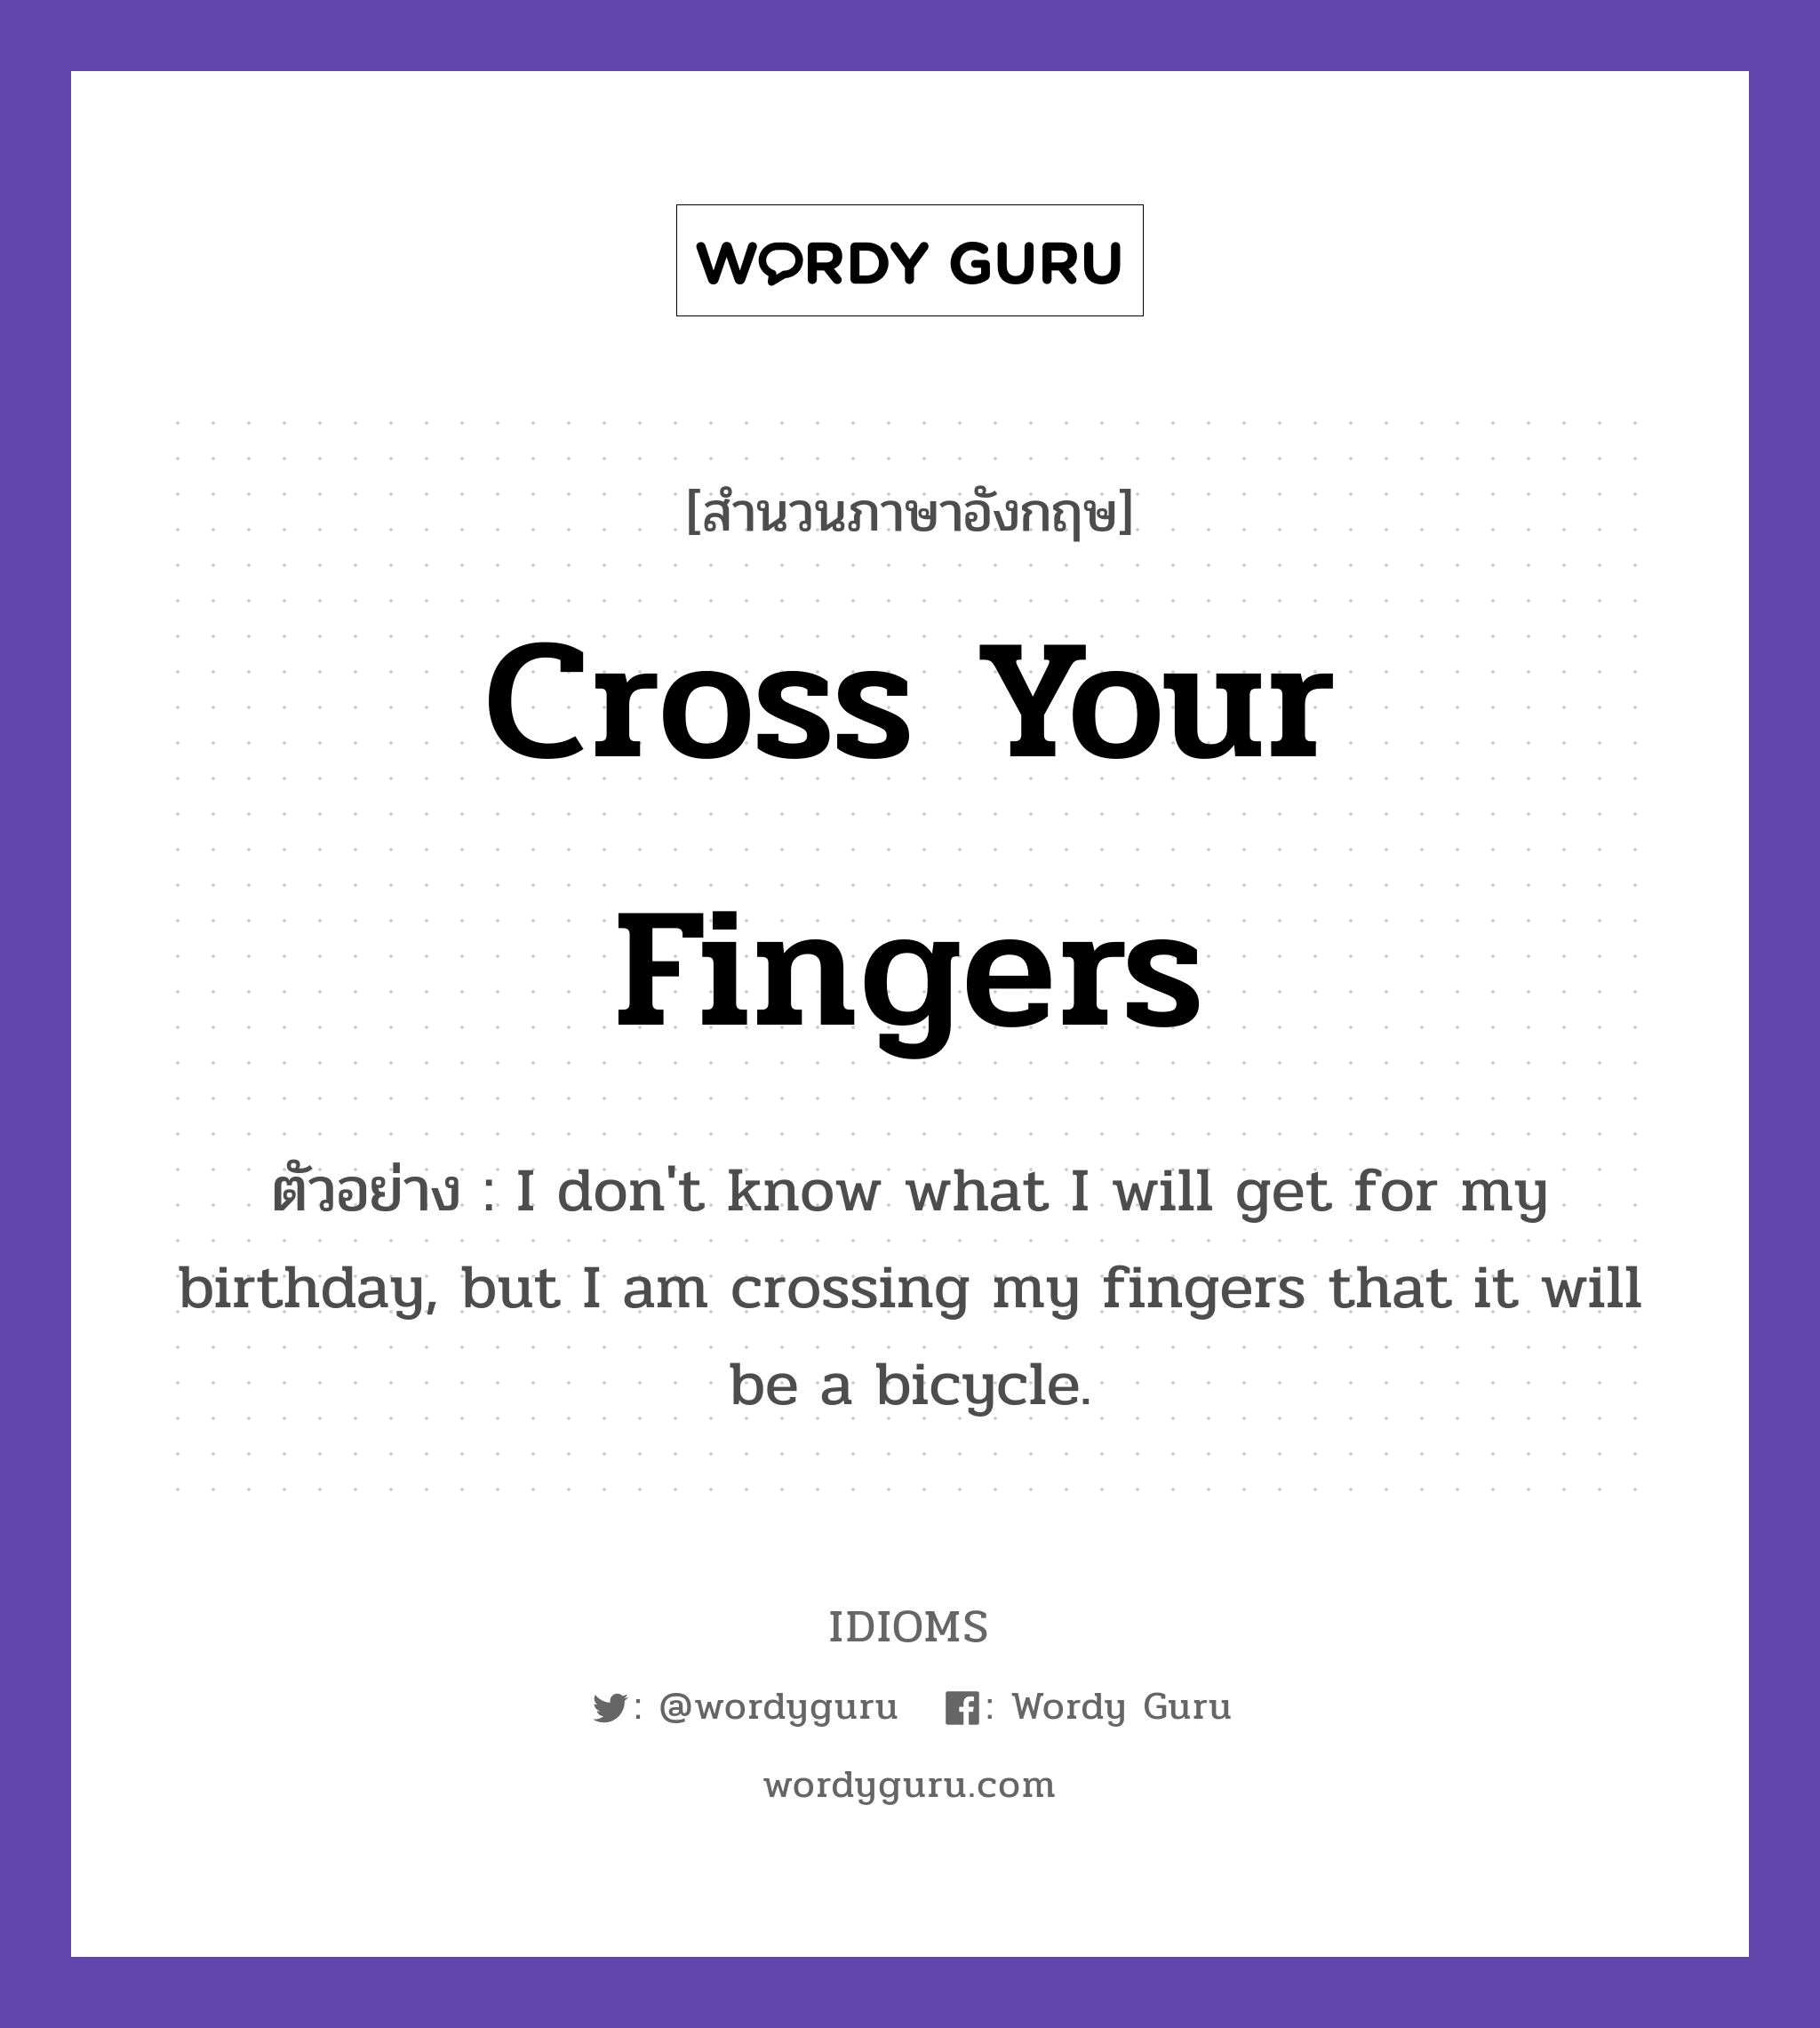 Cross Your Fingers แปลว่า?, สำนวนภาษาอังกฤษ Cross Your Fingers ตัวอย่าง I don't know what I will get for my birthday, but I am crossing my fingers that it will be a bicycle.